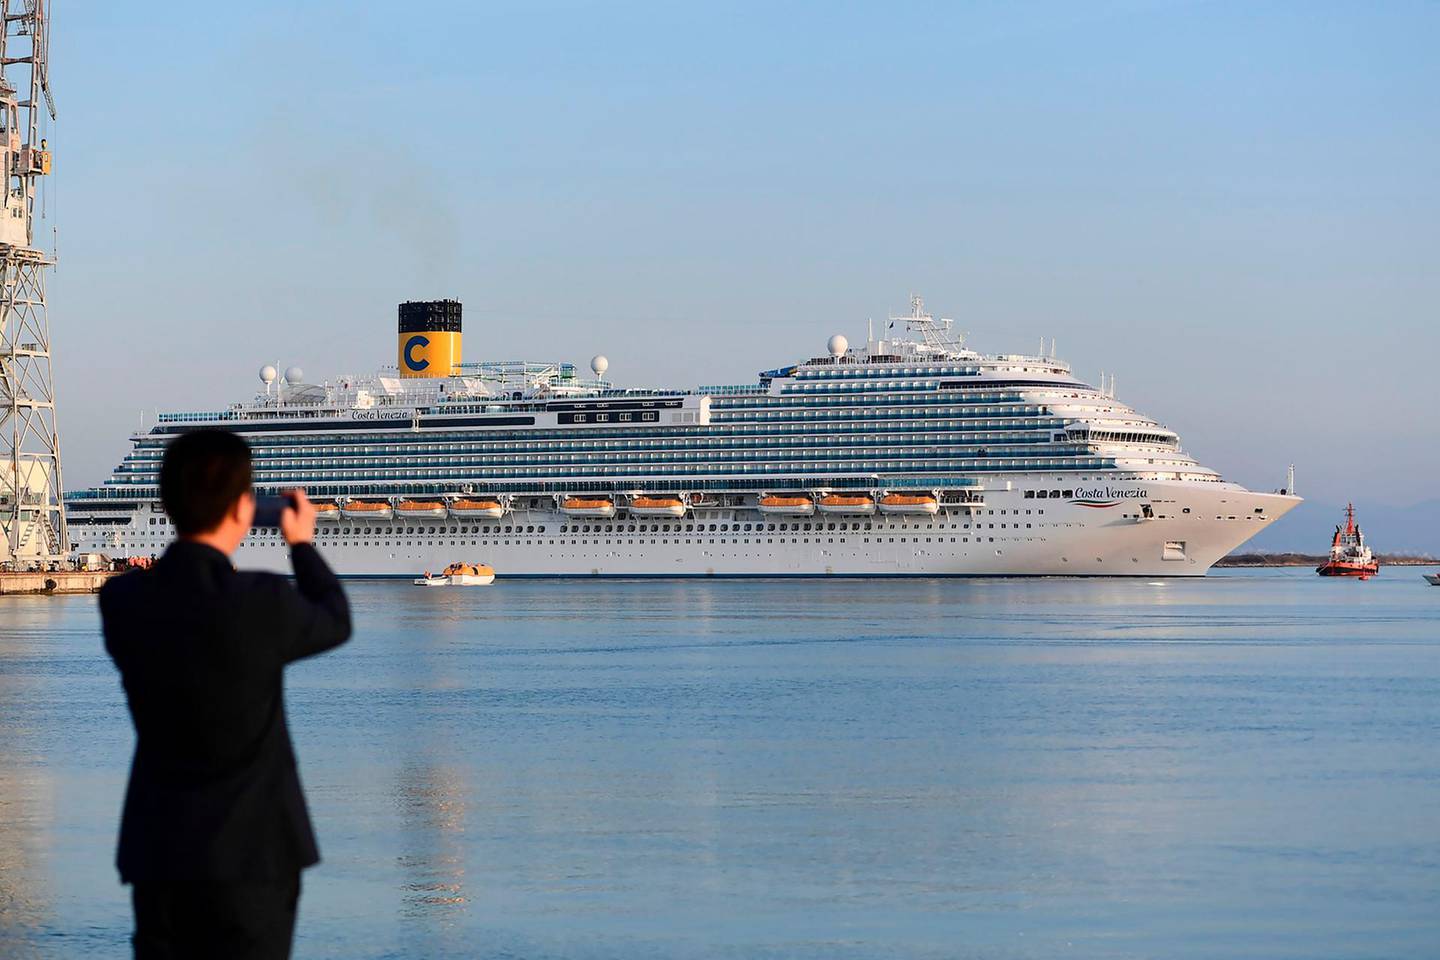 A Chinese observer takes a picture of the Costa Venezia cruise (Costa group), a ship specially designed for Chinese tourists on the theme of Venice, leaving the port of the Italian company Fincantieri shipyard in Monfalcone on February 28, 2019.
 The Costa Cruises' Costa Venezia will be able to accommodate 5,260 Chinese tourists, who will travel between Shanghai and Japan. / AFP / Miguel MEDINA
